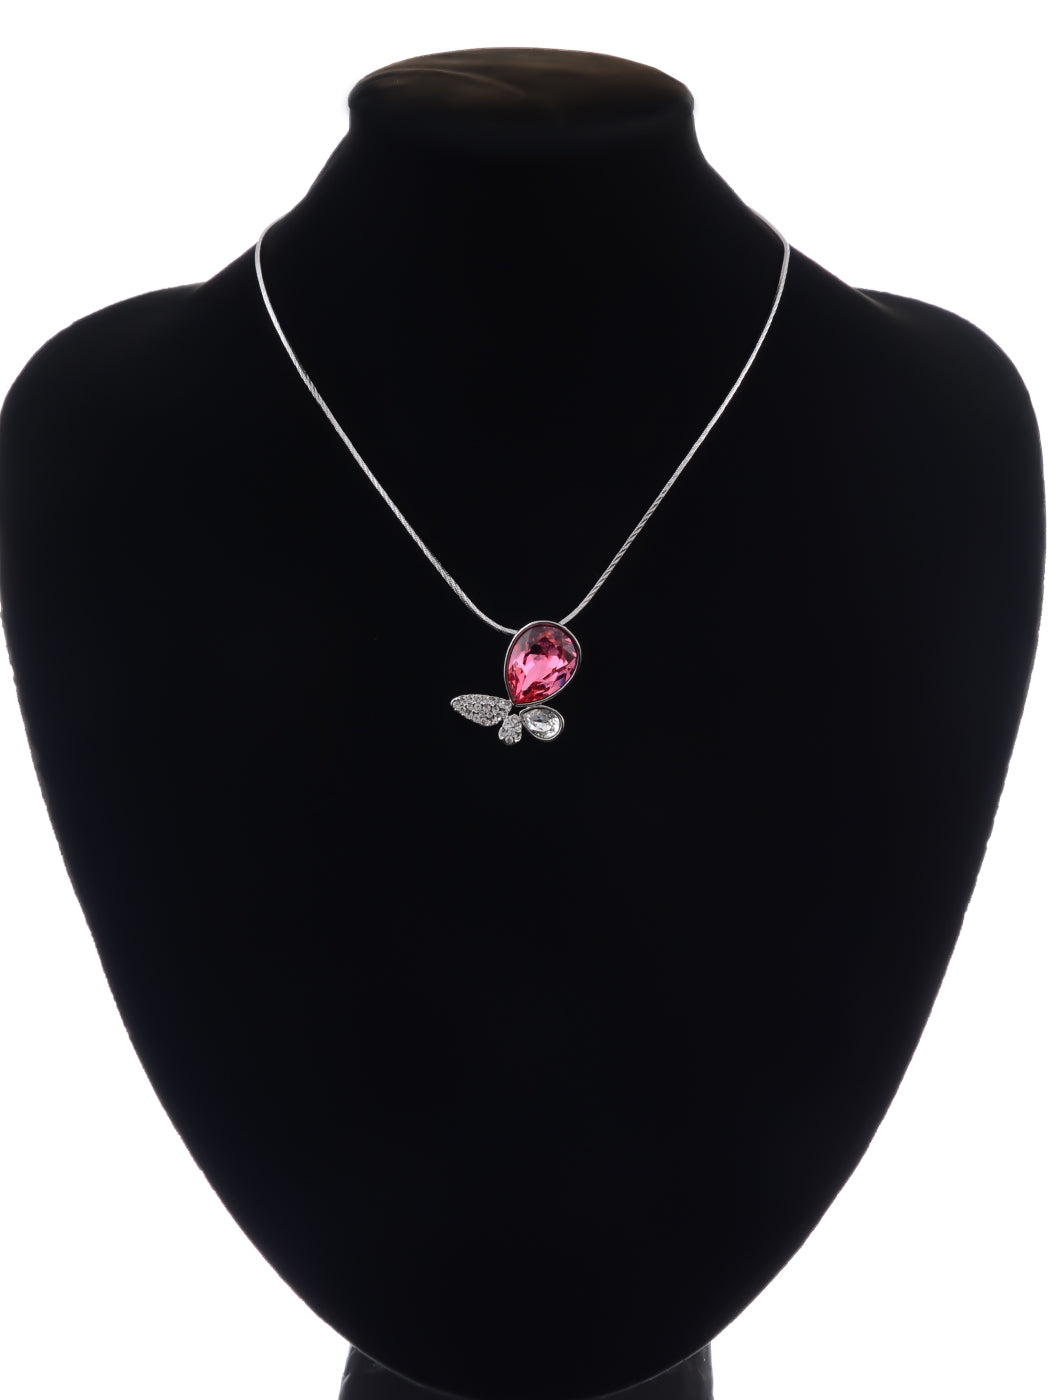 Swarovski Crystal Pink Fuchsia Abstract Butterfly Pendant Necklace